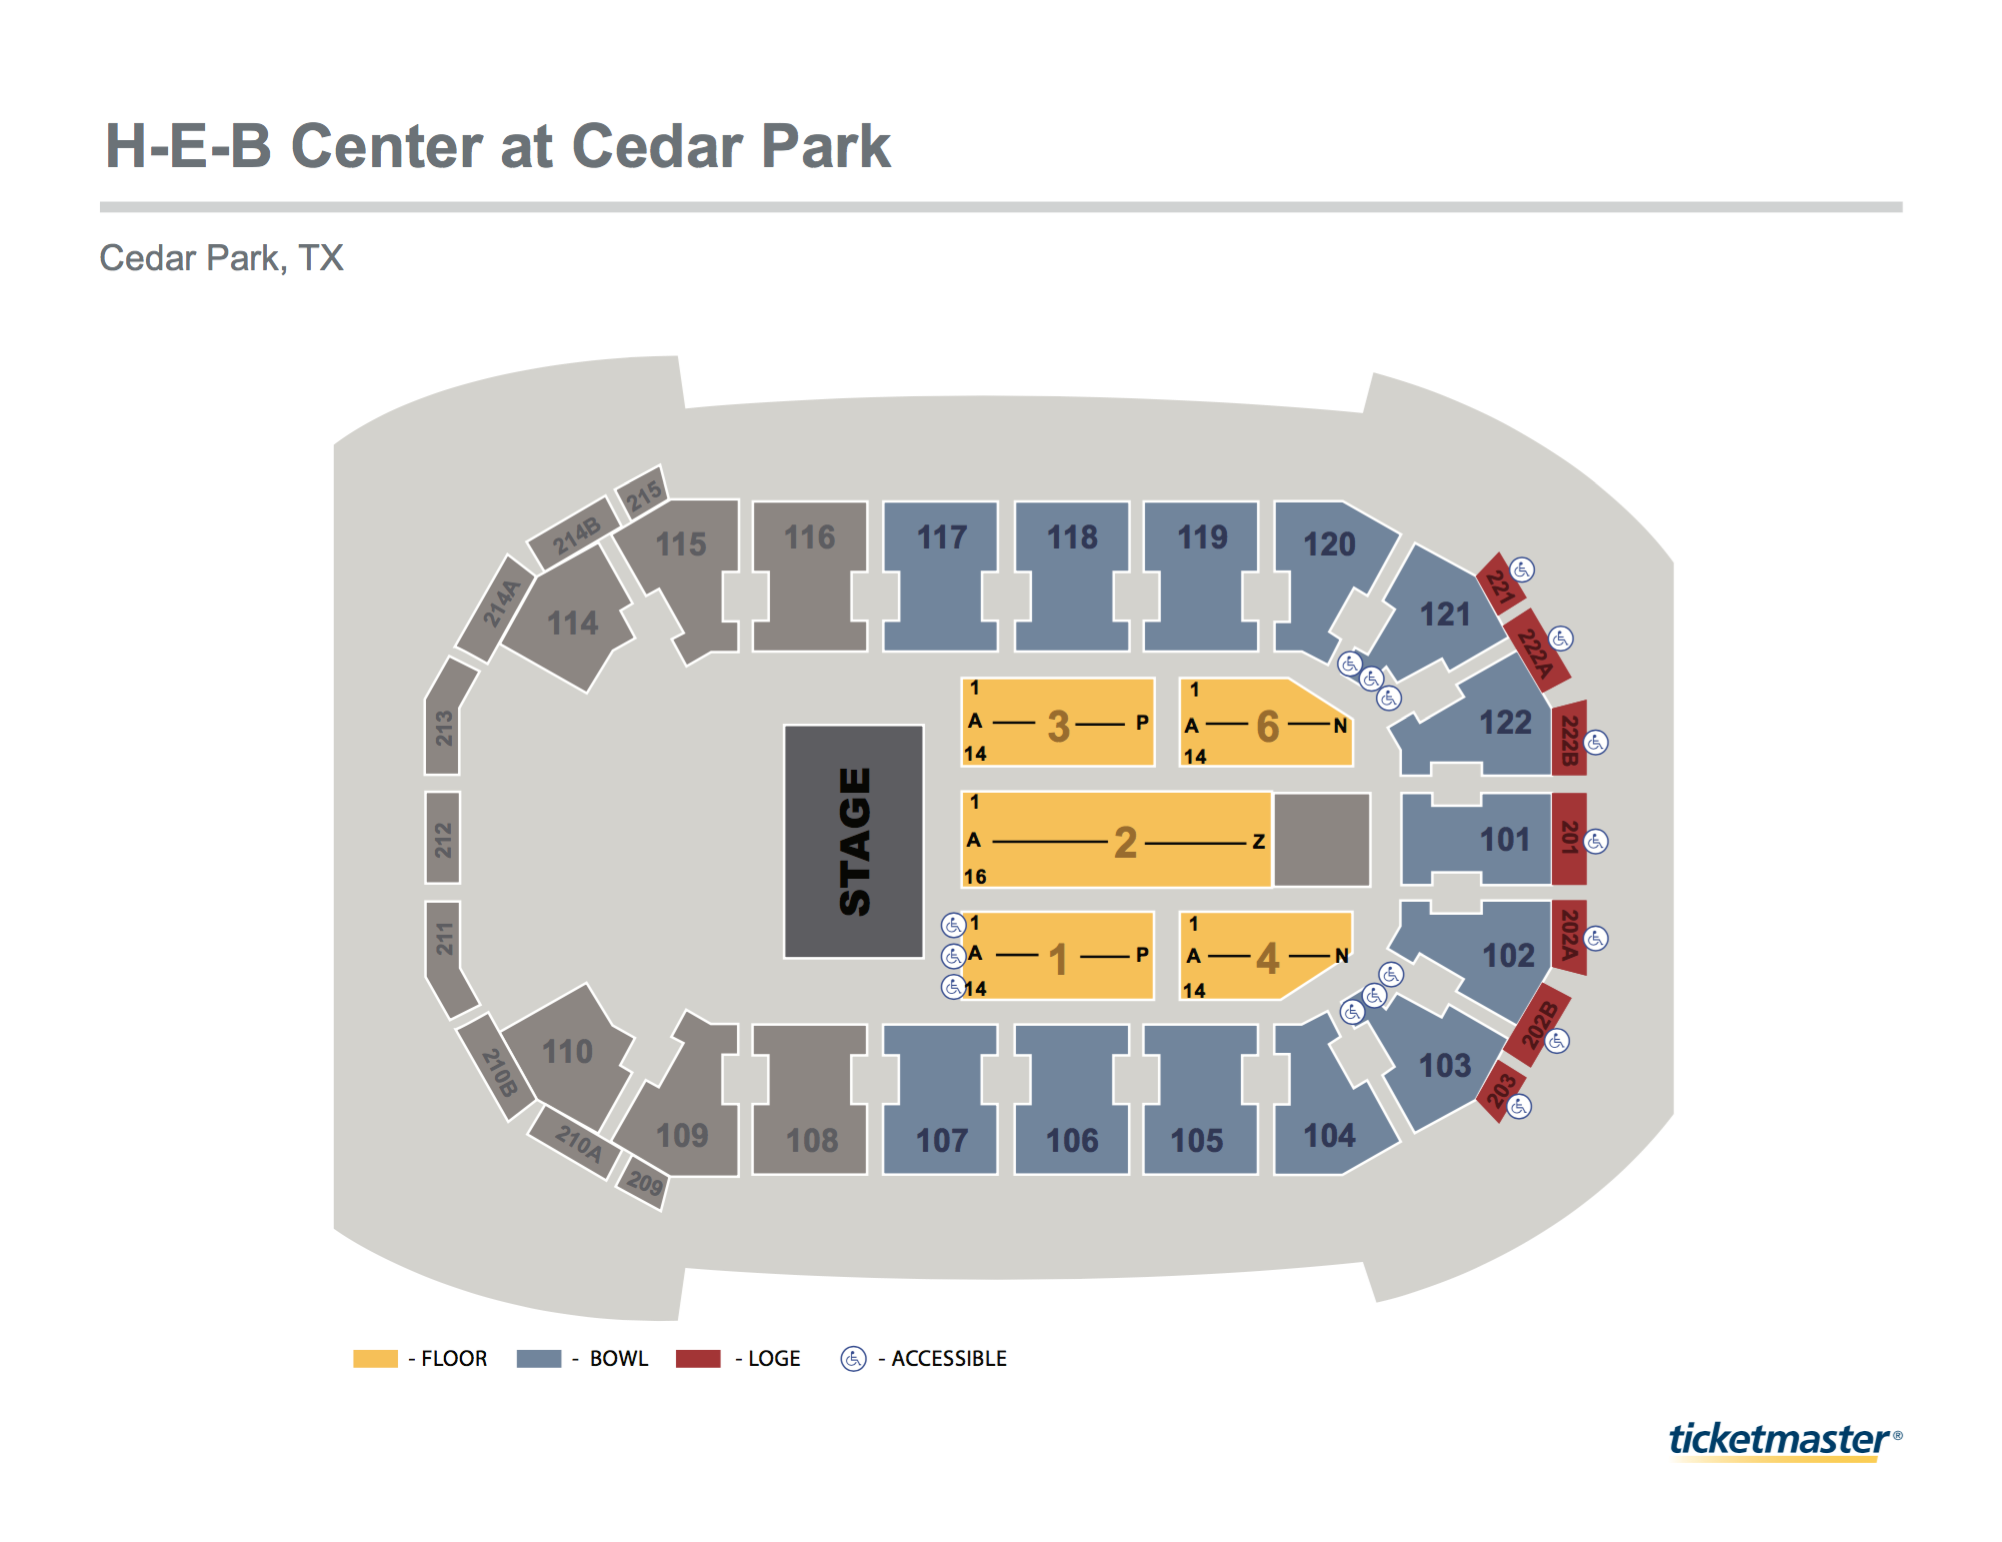 Austin Rodeo Seating Chart